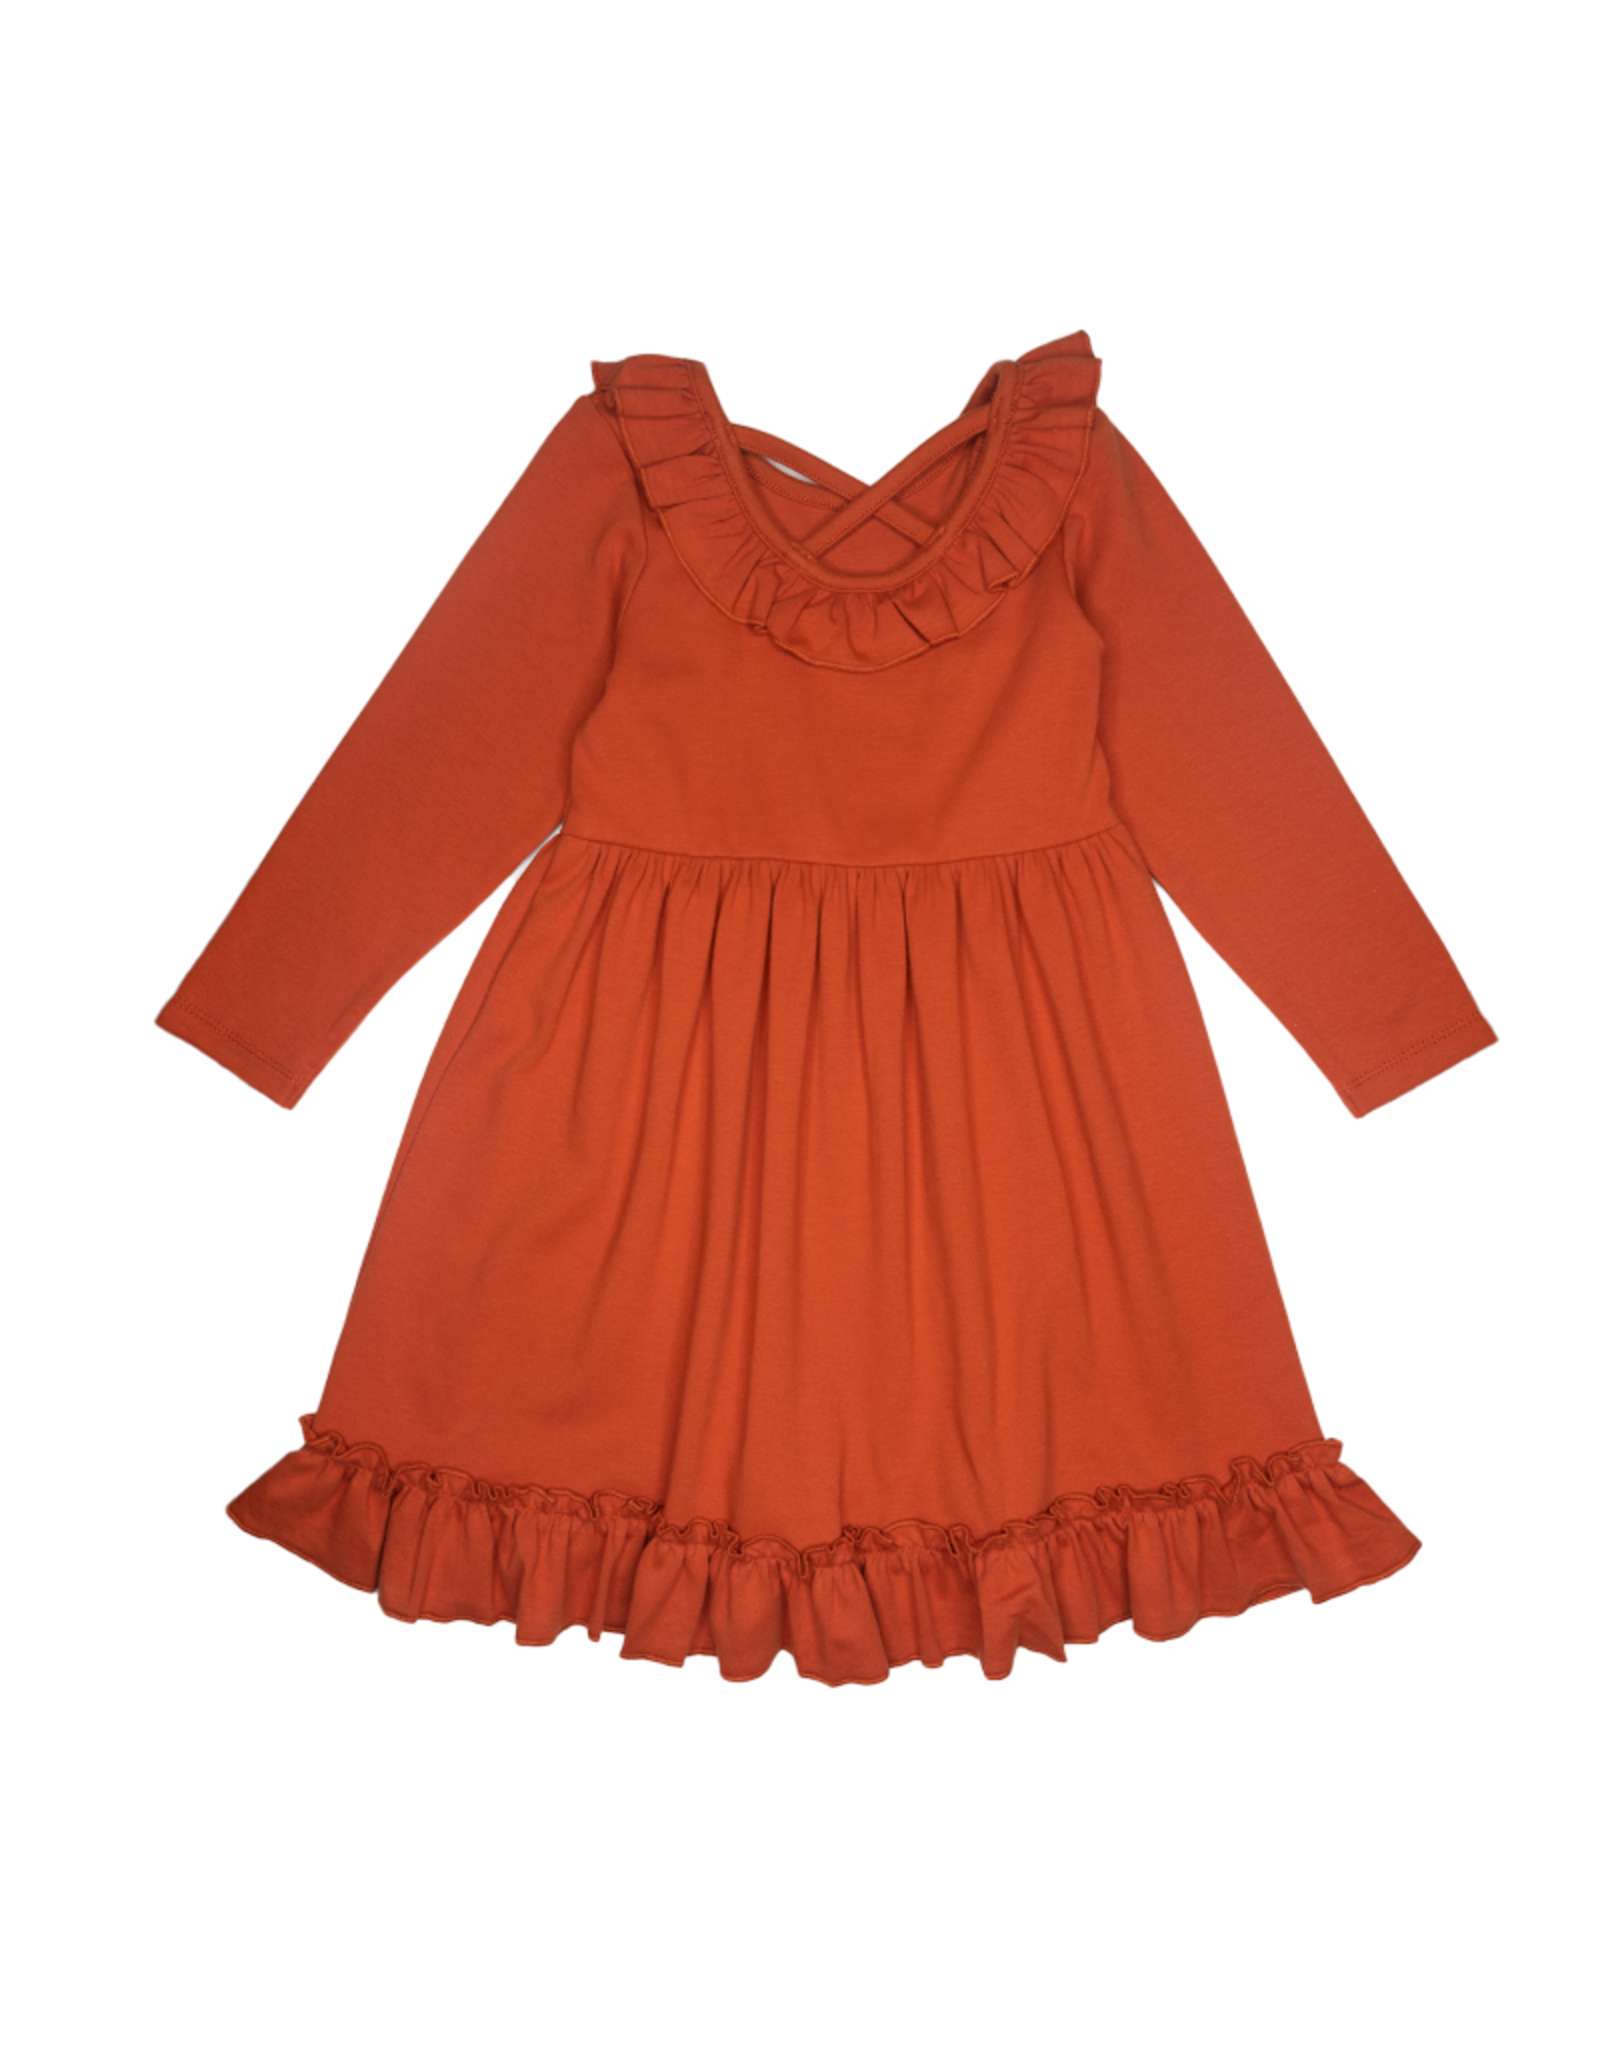 Millie Jay 639 Claire Crossback Rust Dress